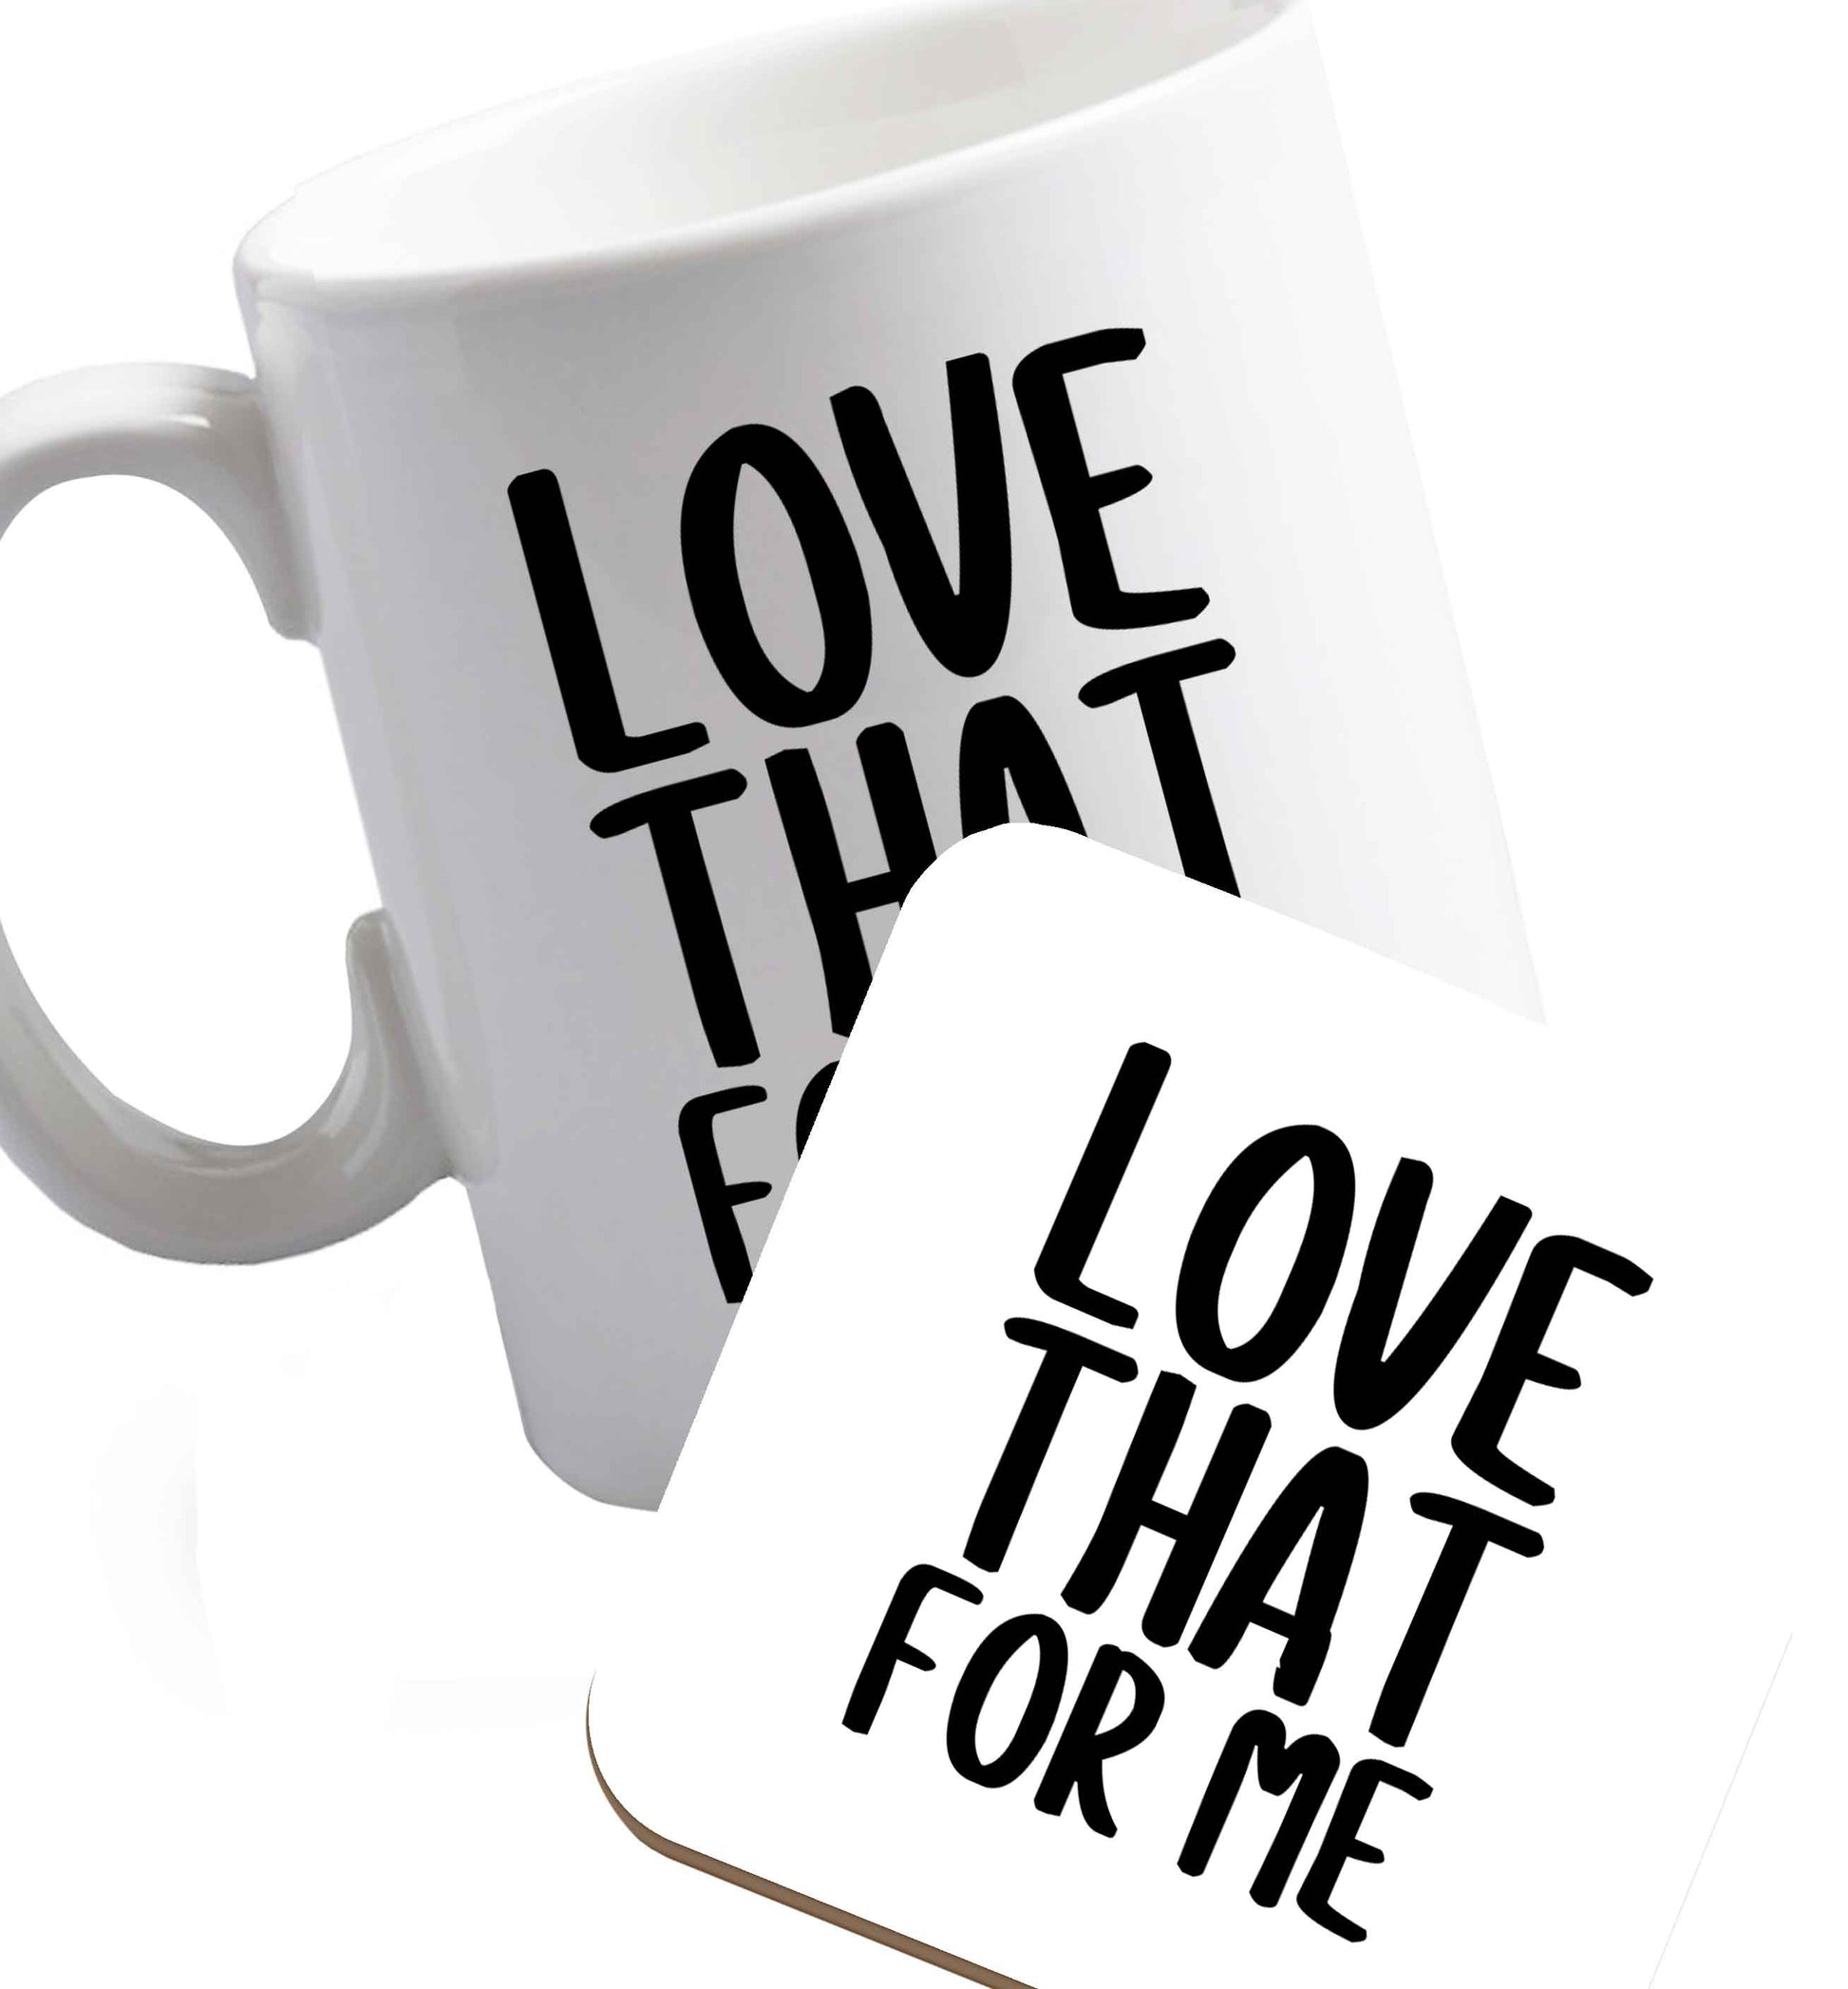 10 oz We love this for YOU! Who else loves saying this?!    ceramic mug and coaster set right handed